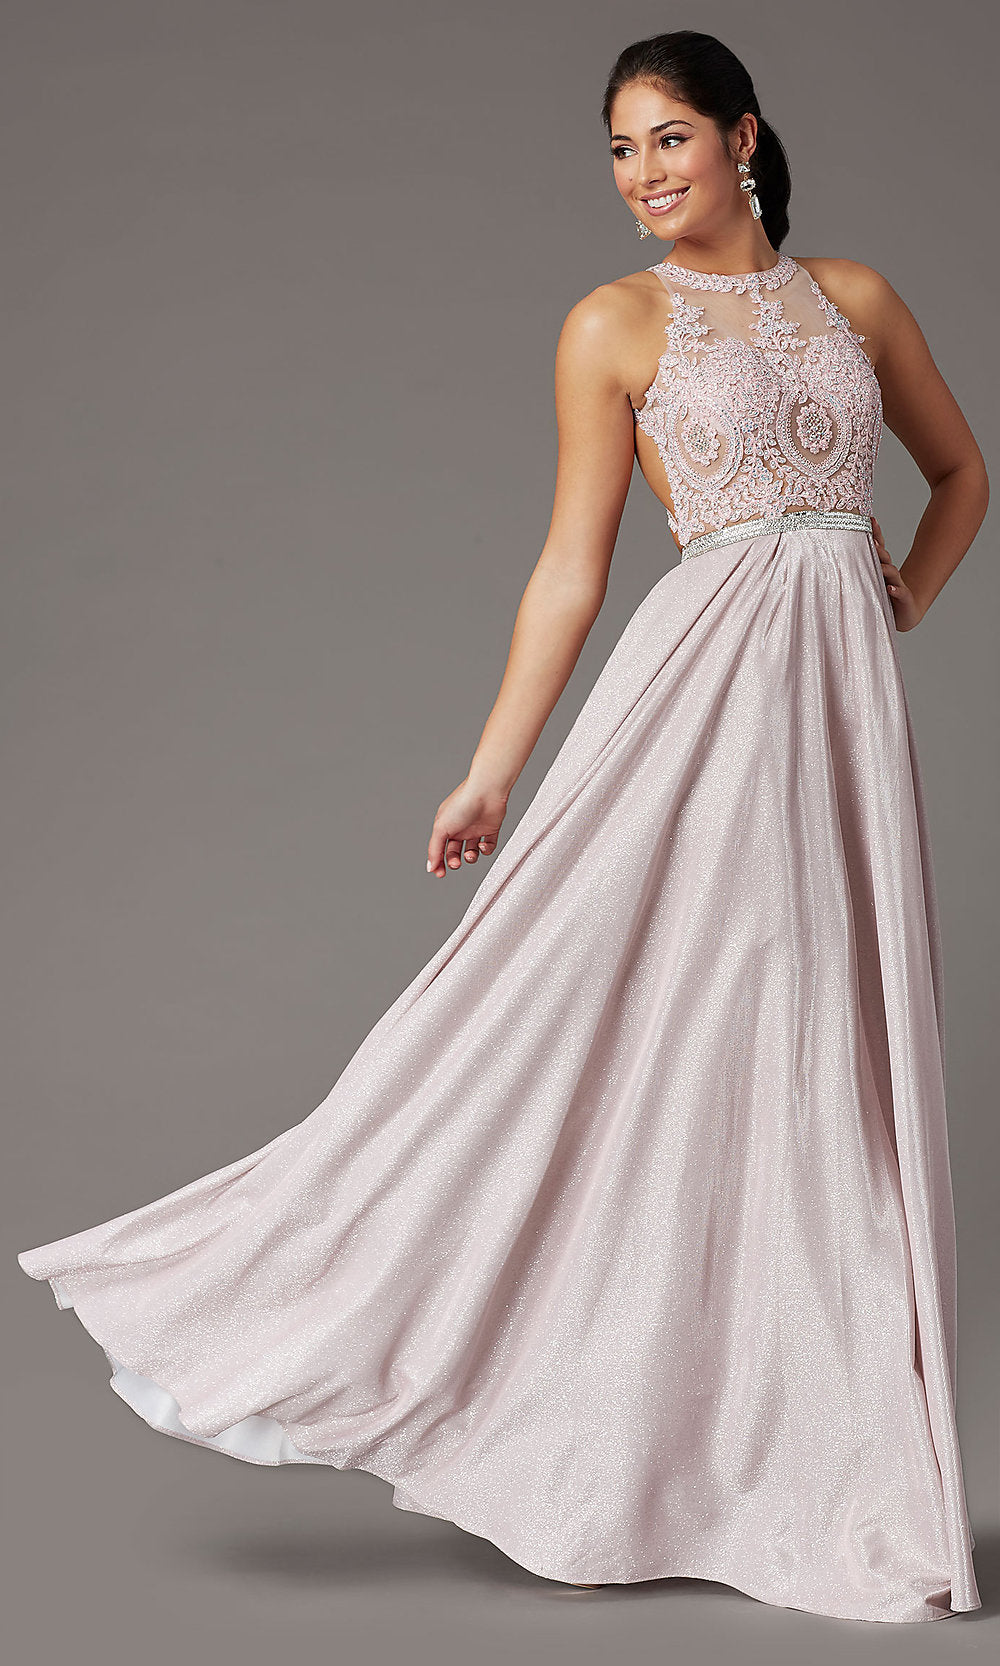 Glitter-Knit Long Sparkly Prom Dress with Pockets